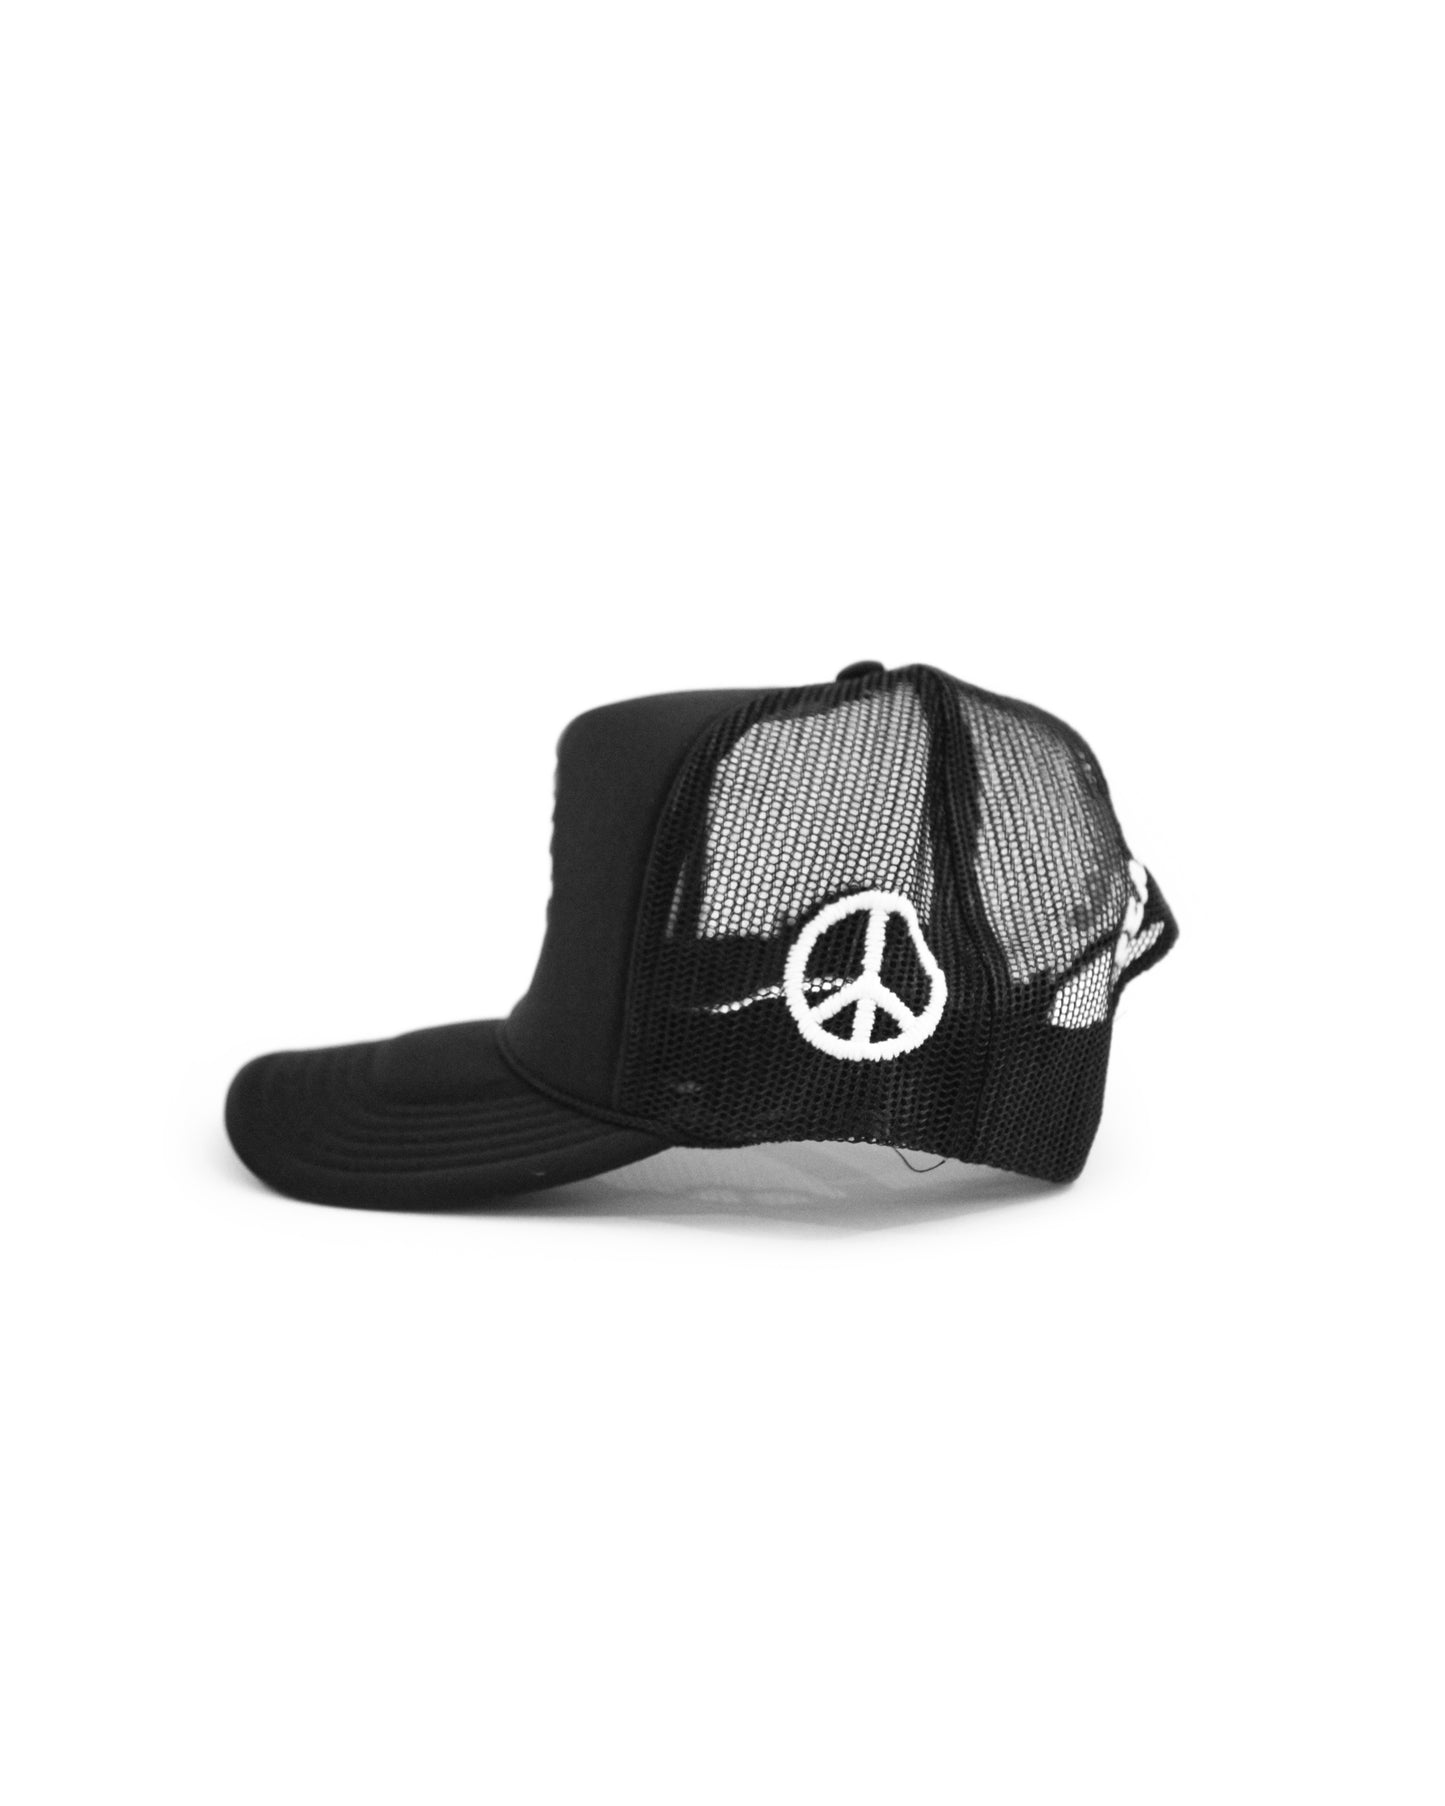 EVOL Peace Hat Black And Yellow